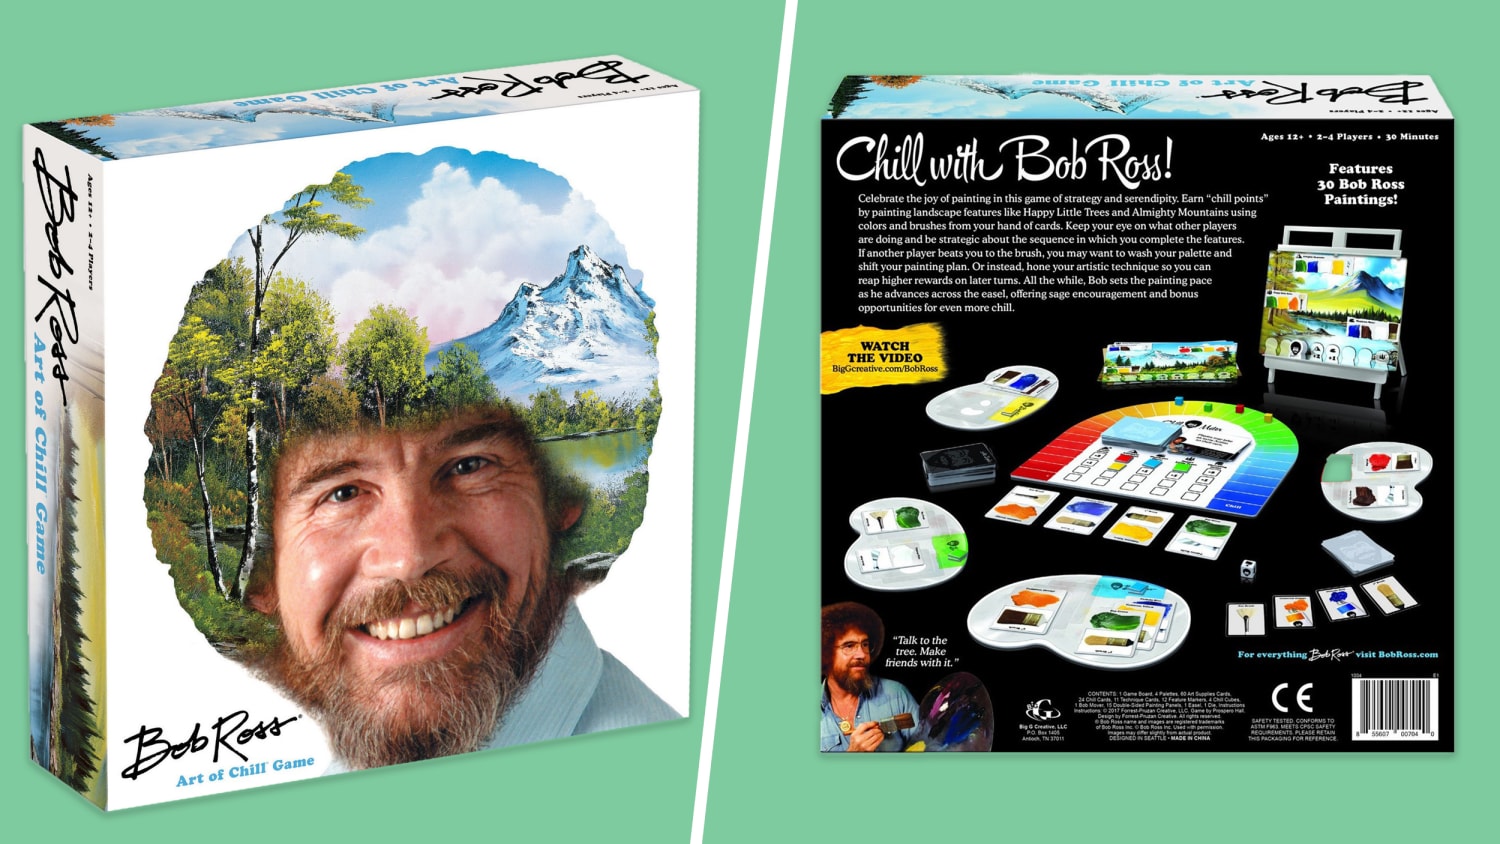 Target is selling a Bob Ross board game and it looks delightful